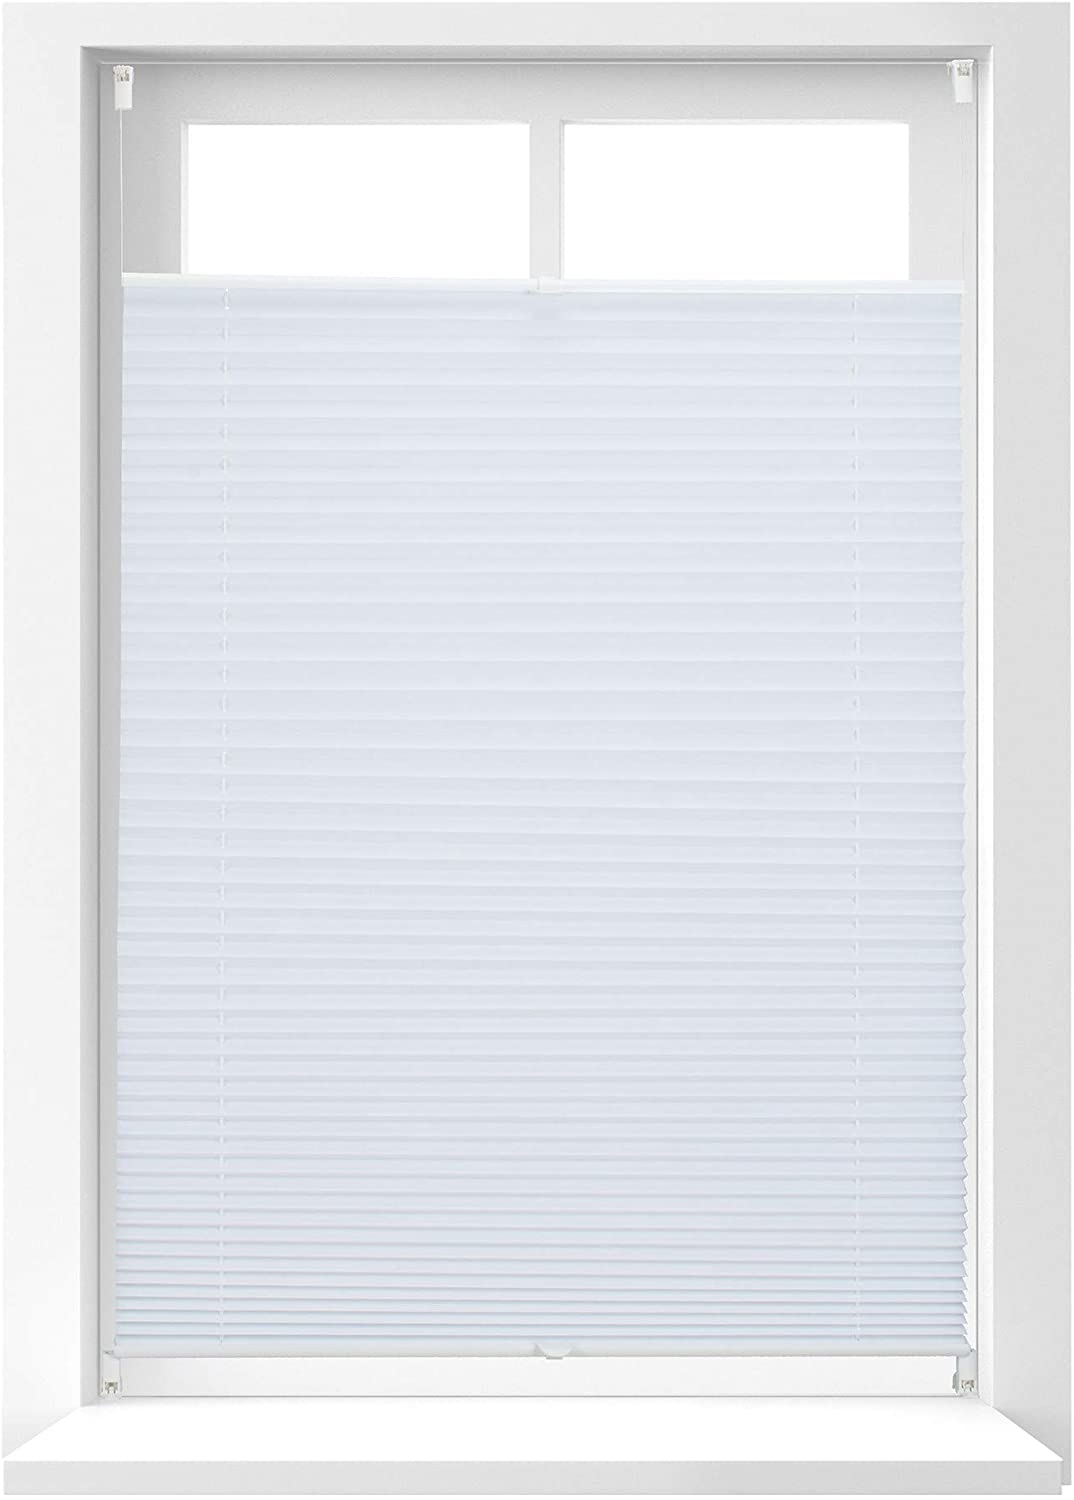 1 X Pleated Blind Without Drilling, Klemmfix For Gluing, Folding Blind Tran